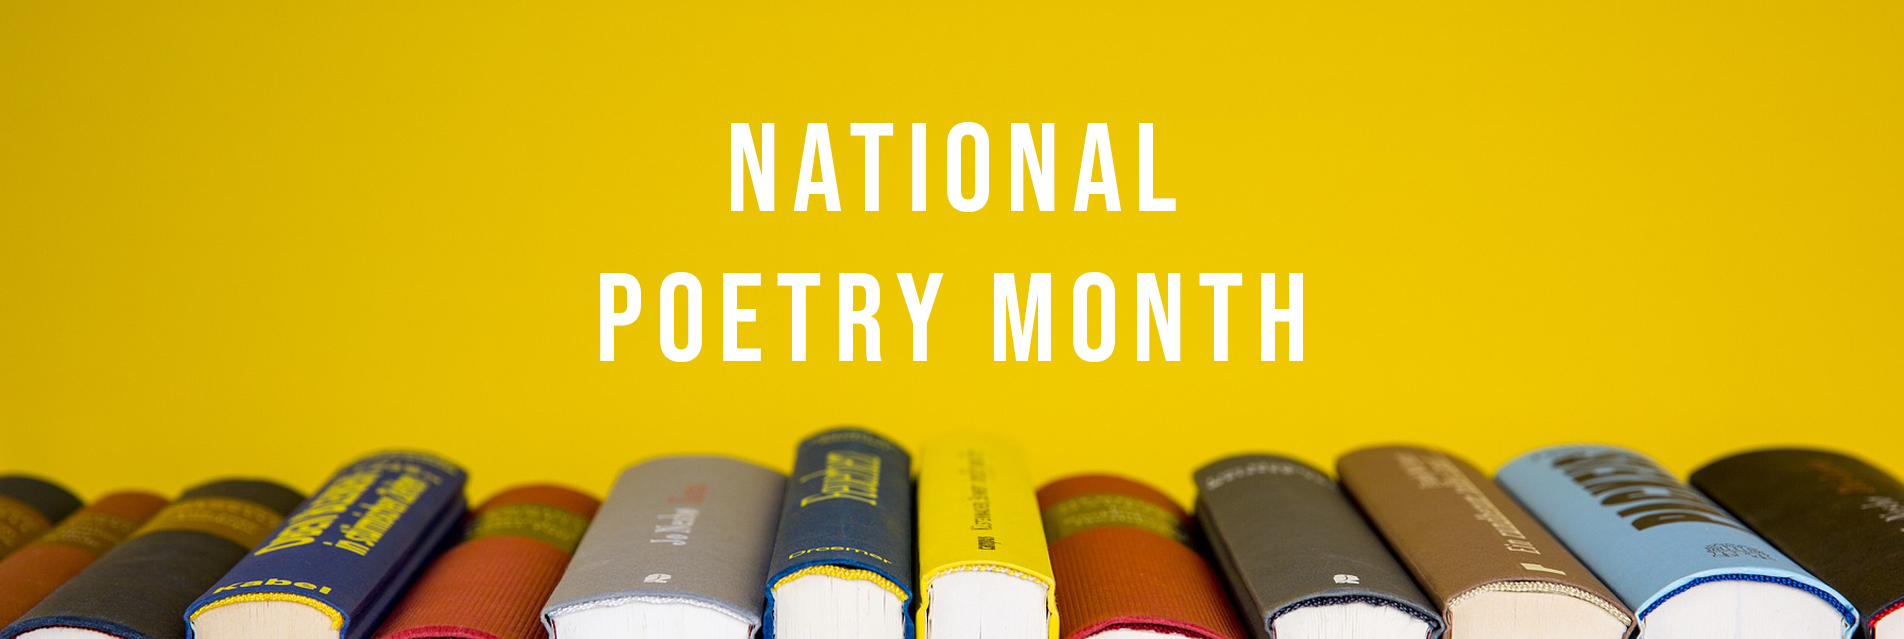 13-facts-about-national-poetry-month